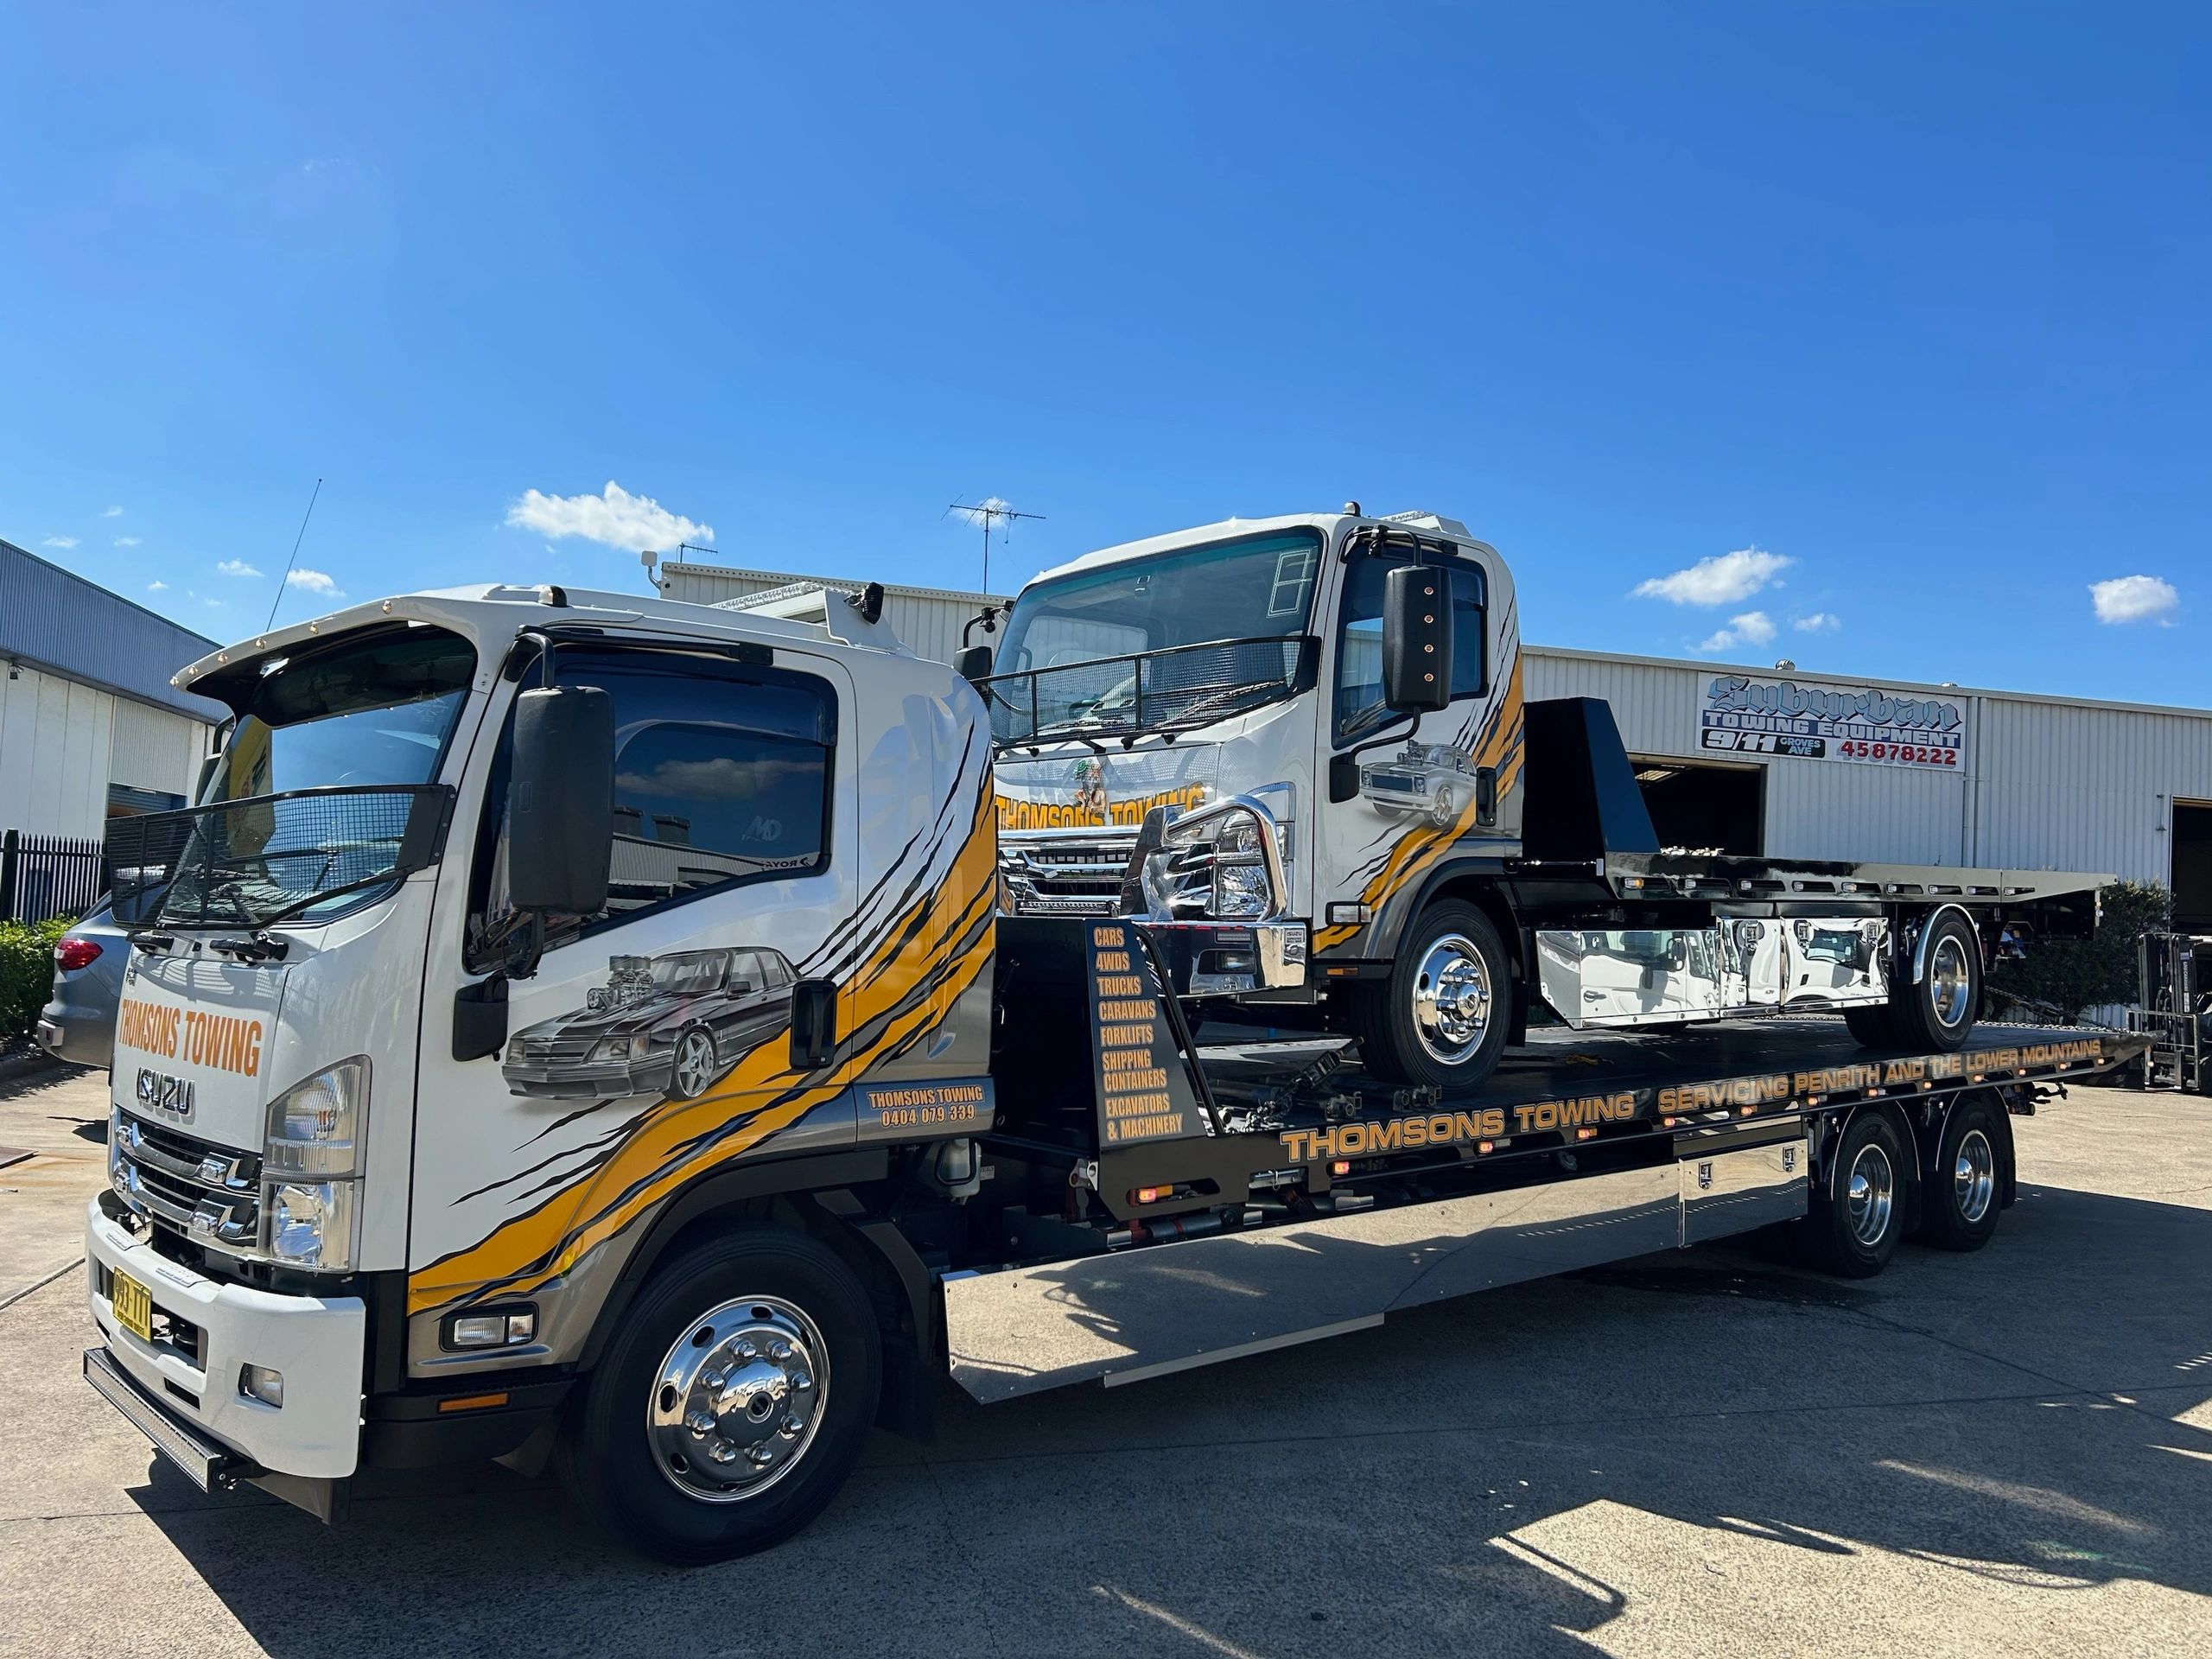 Tow Truck Silverdale | Vehicle Towing Silverdale | Towing Company Silverdale